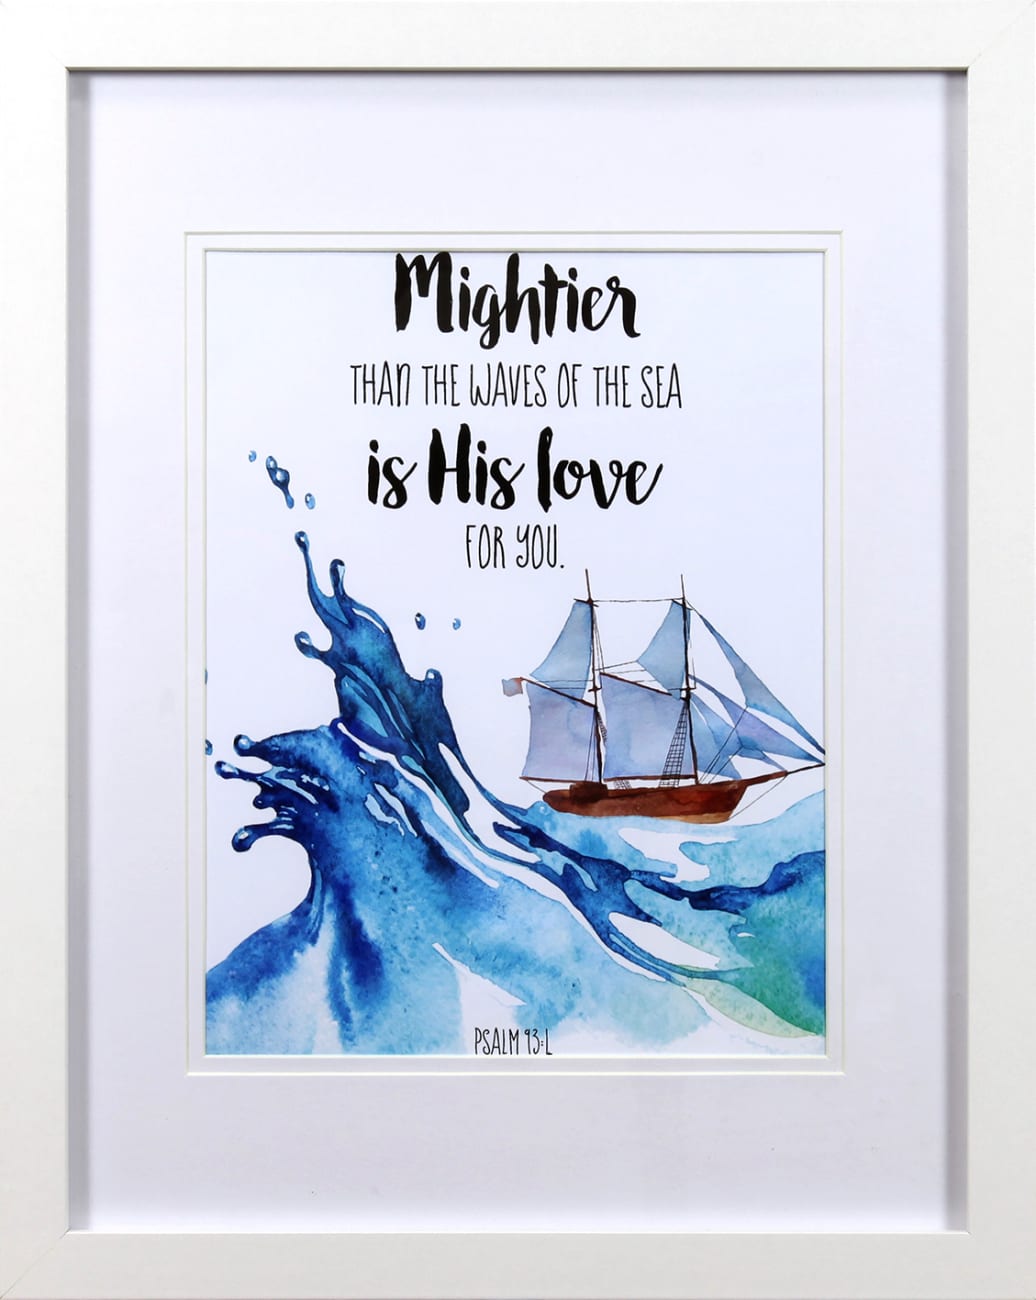 Framed Children's Print Watercolour Ship Mightier Than the Waves (Psalm 93: 4) Wall Art